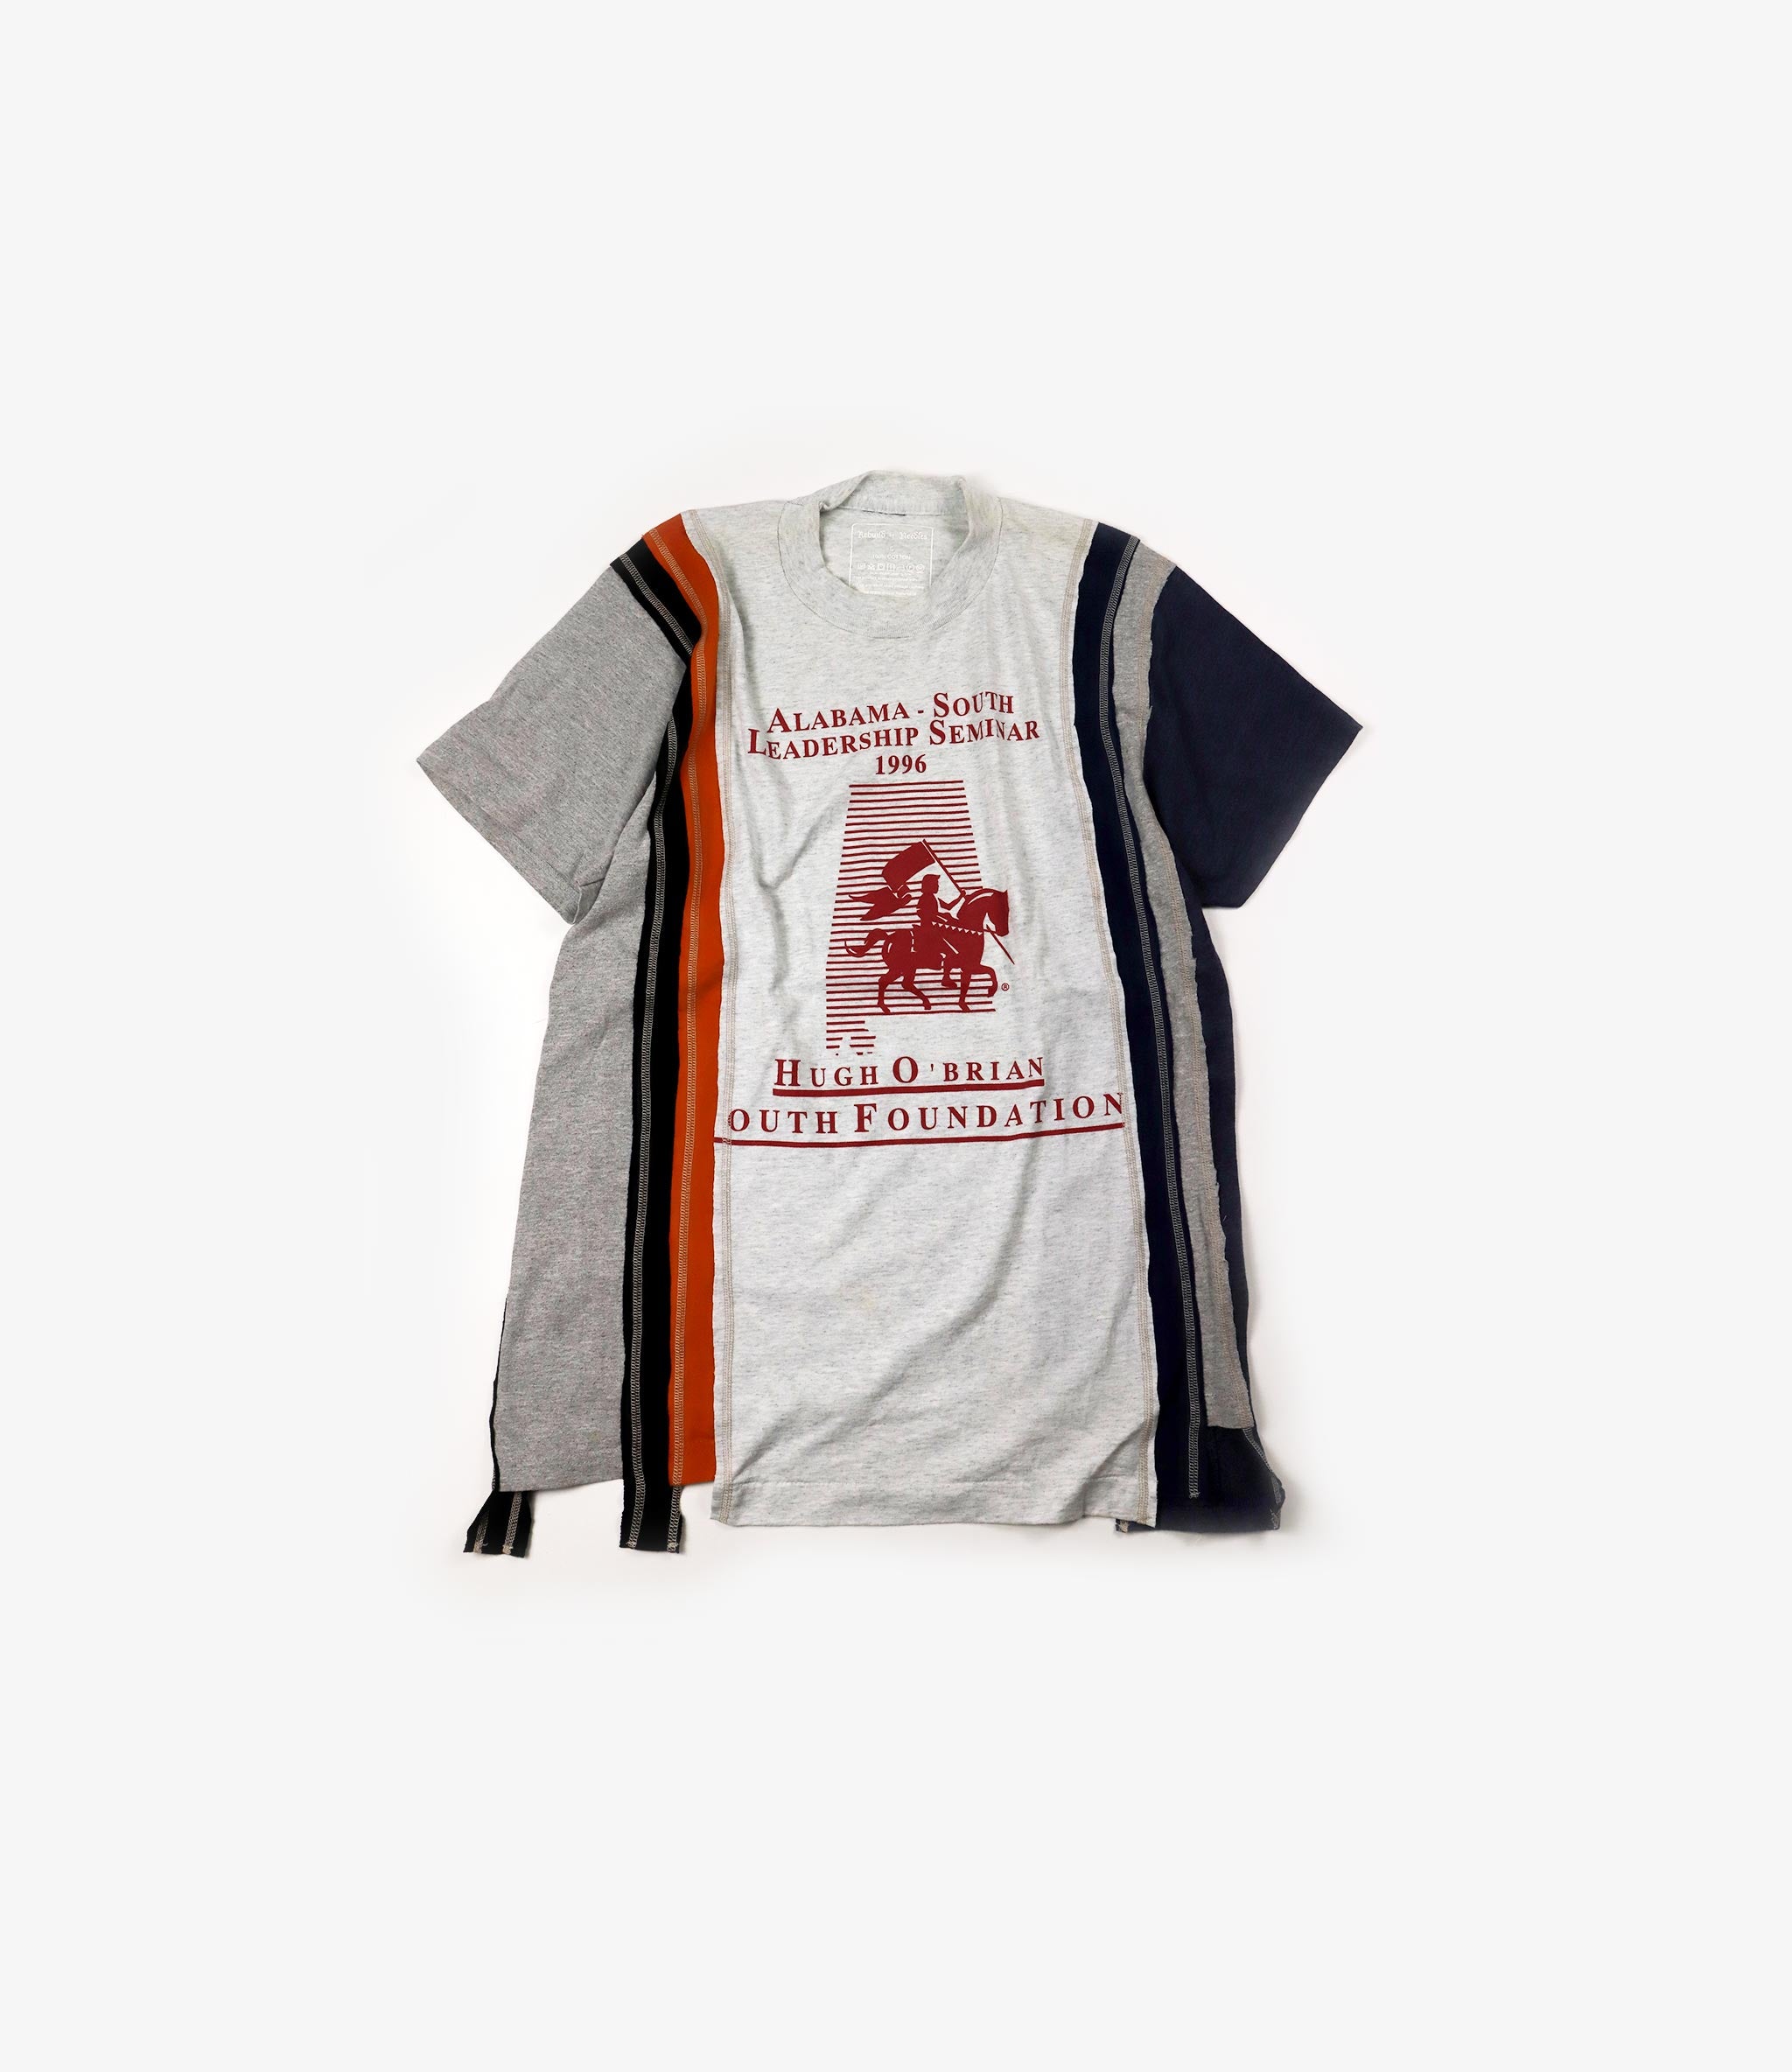 Rebuild by Needles 7 Cuts Short Sleeve College Tee - S